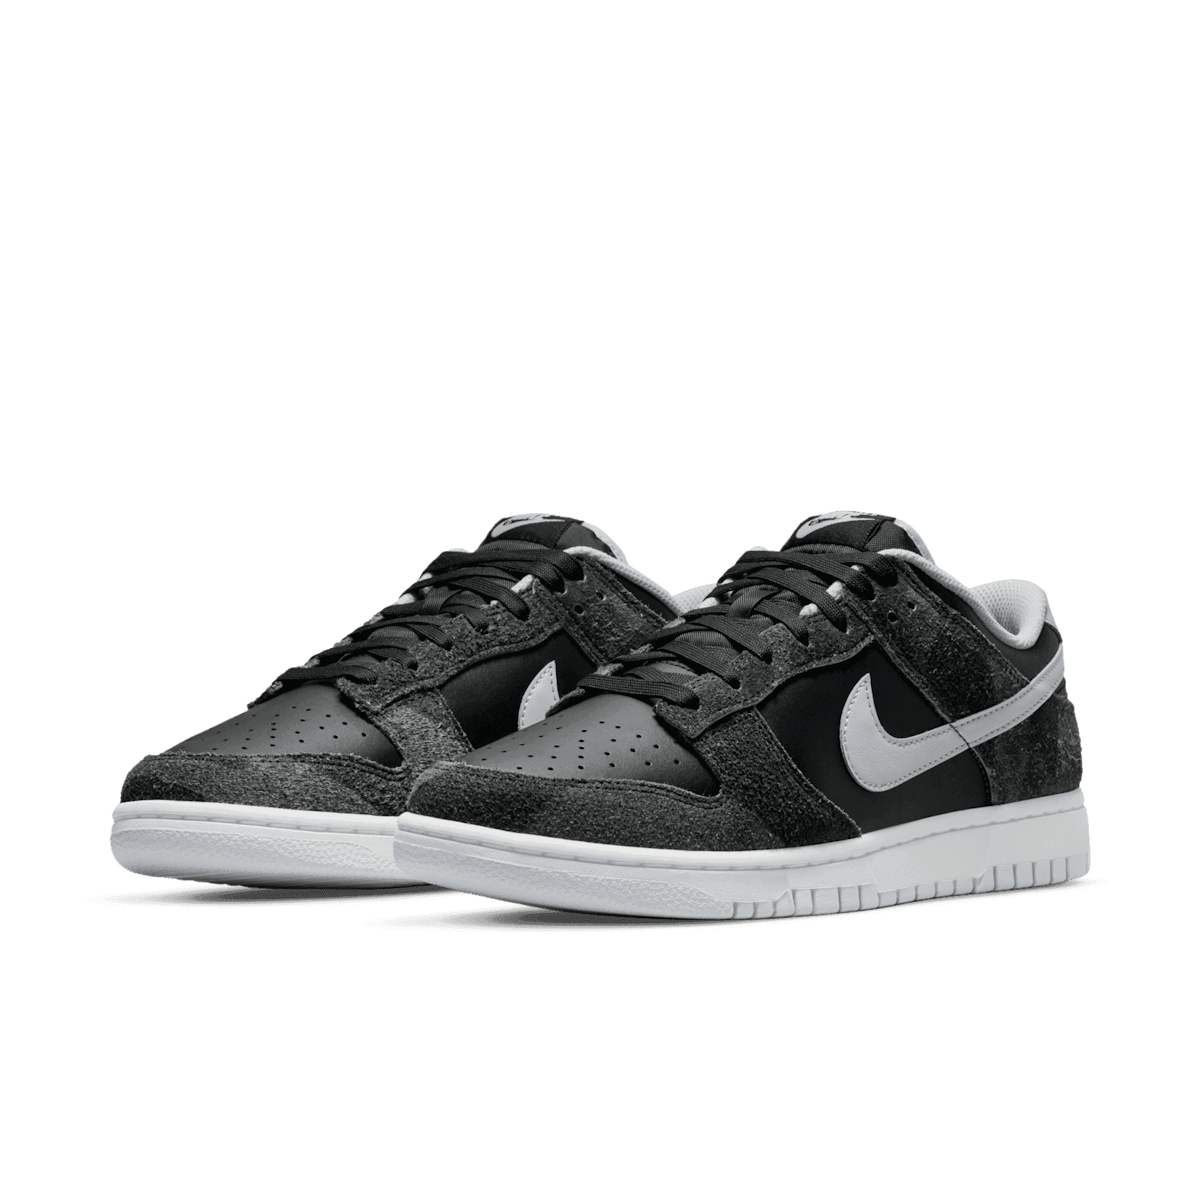 Nike Dunk Low PRM Animal Pack Zebra - DH7913-001 Raffles and 